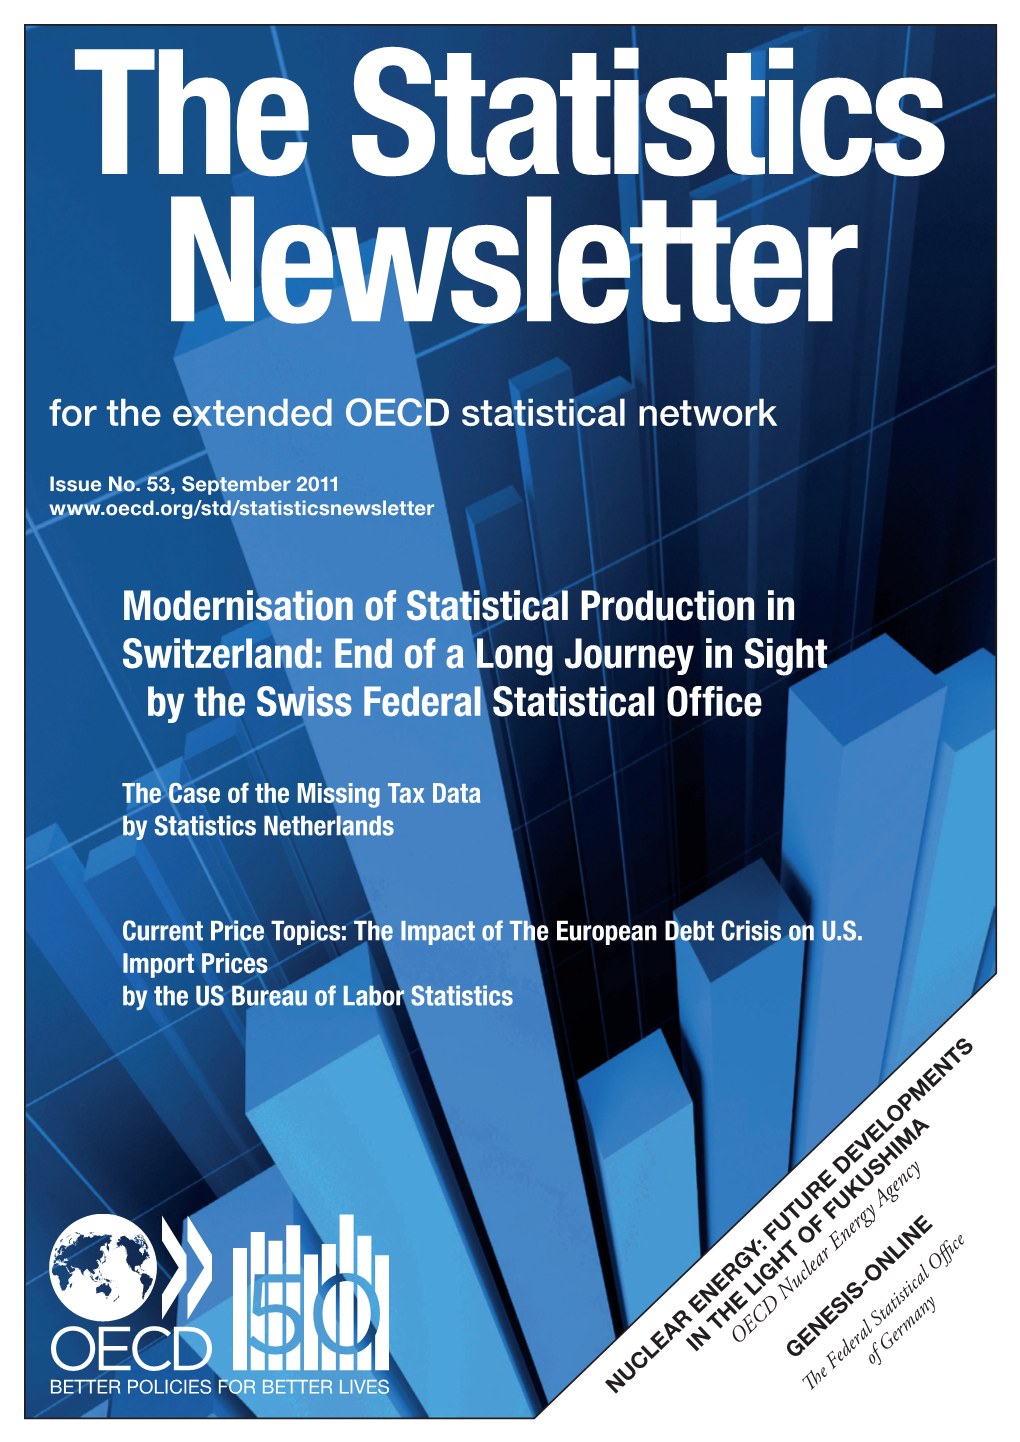 Modernisation of Statistical Production in Switzerland: End of a Long Journey in Sight by the Swiss Federal Statistical Office